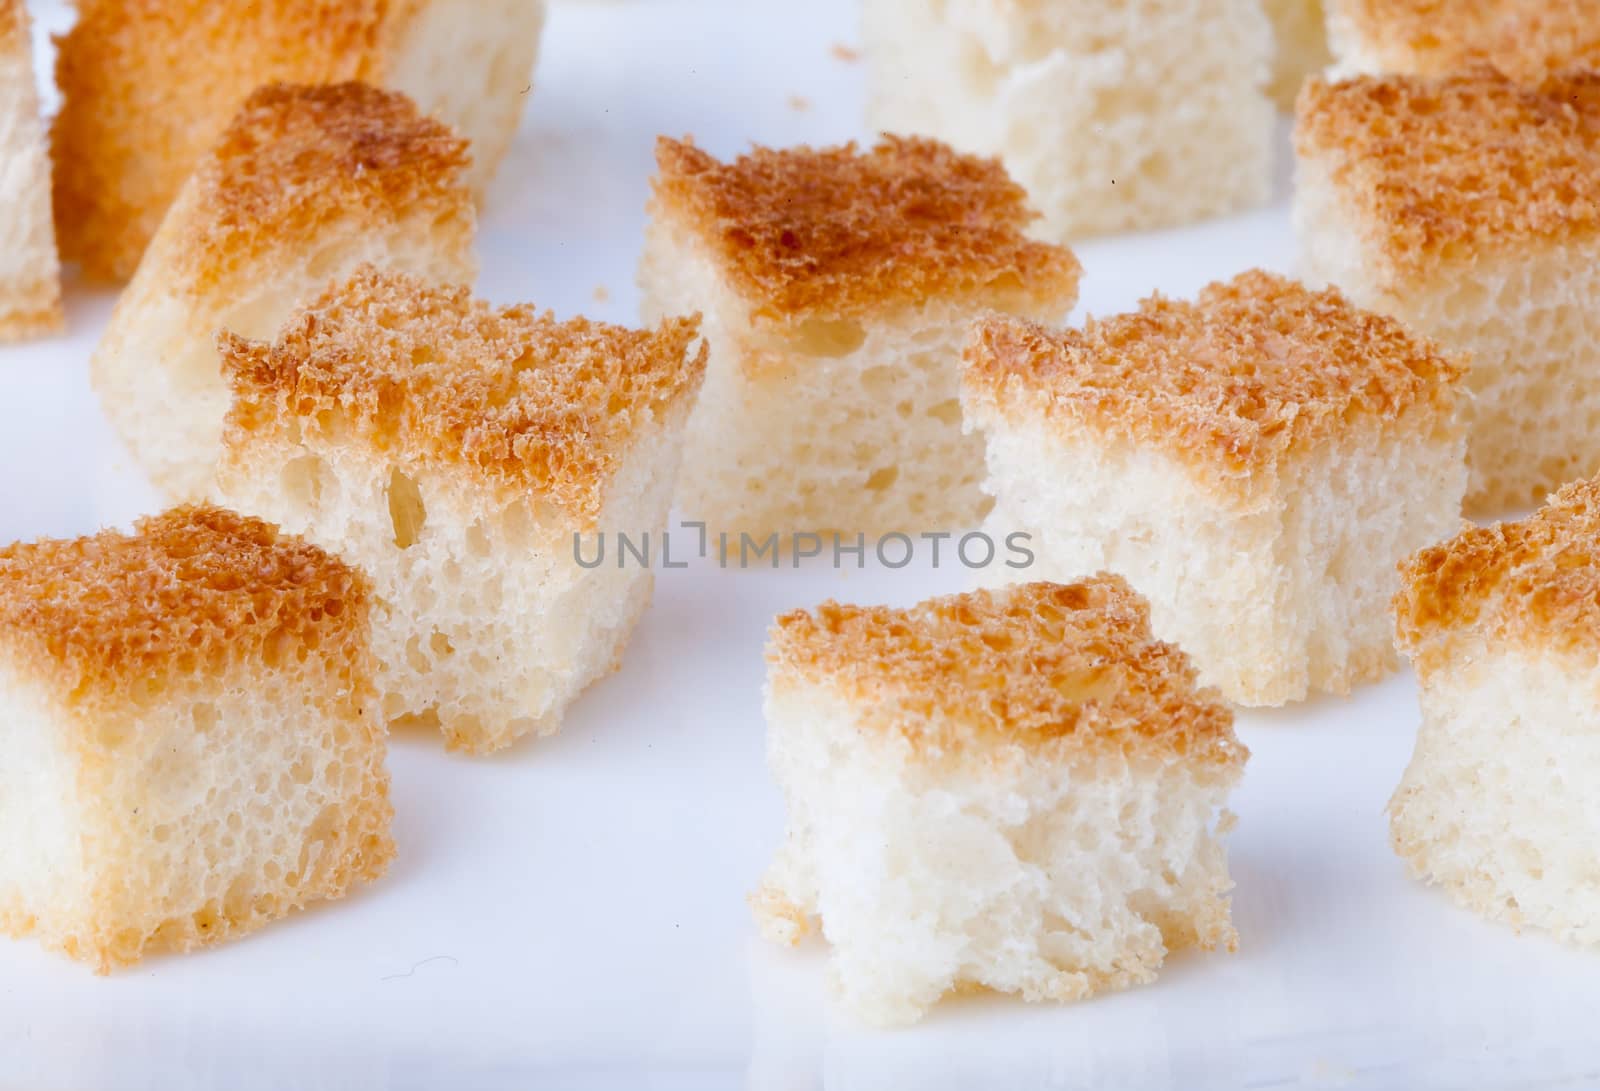 Fried brow pieaces of bread